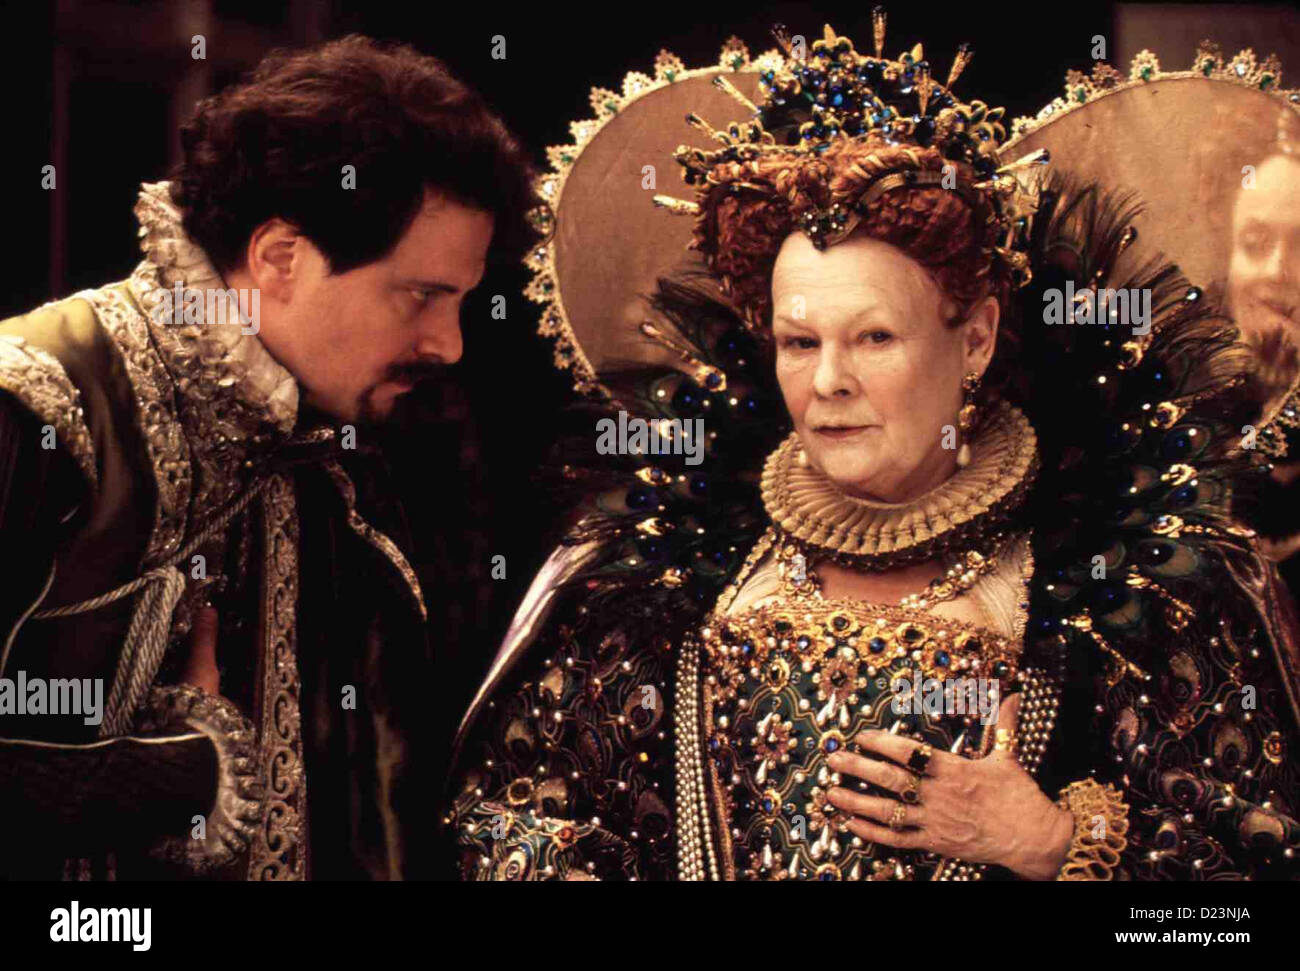 Shakespeare In Love  Shakespeare In Love  Lord Wessex (Colin Firth), Queen Elizabeth (Judi Dench) *** Local Caption *** 1998 Stock Photo